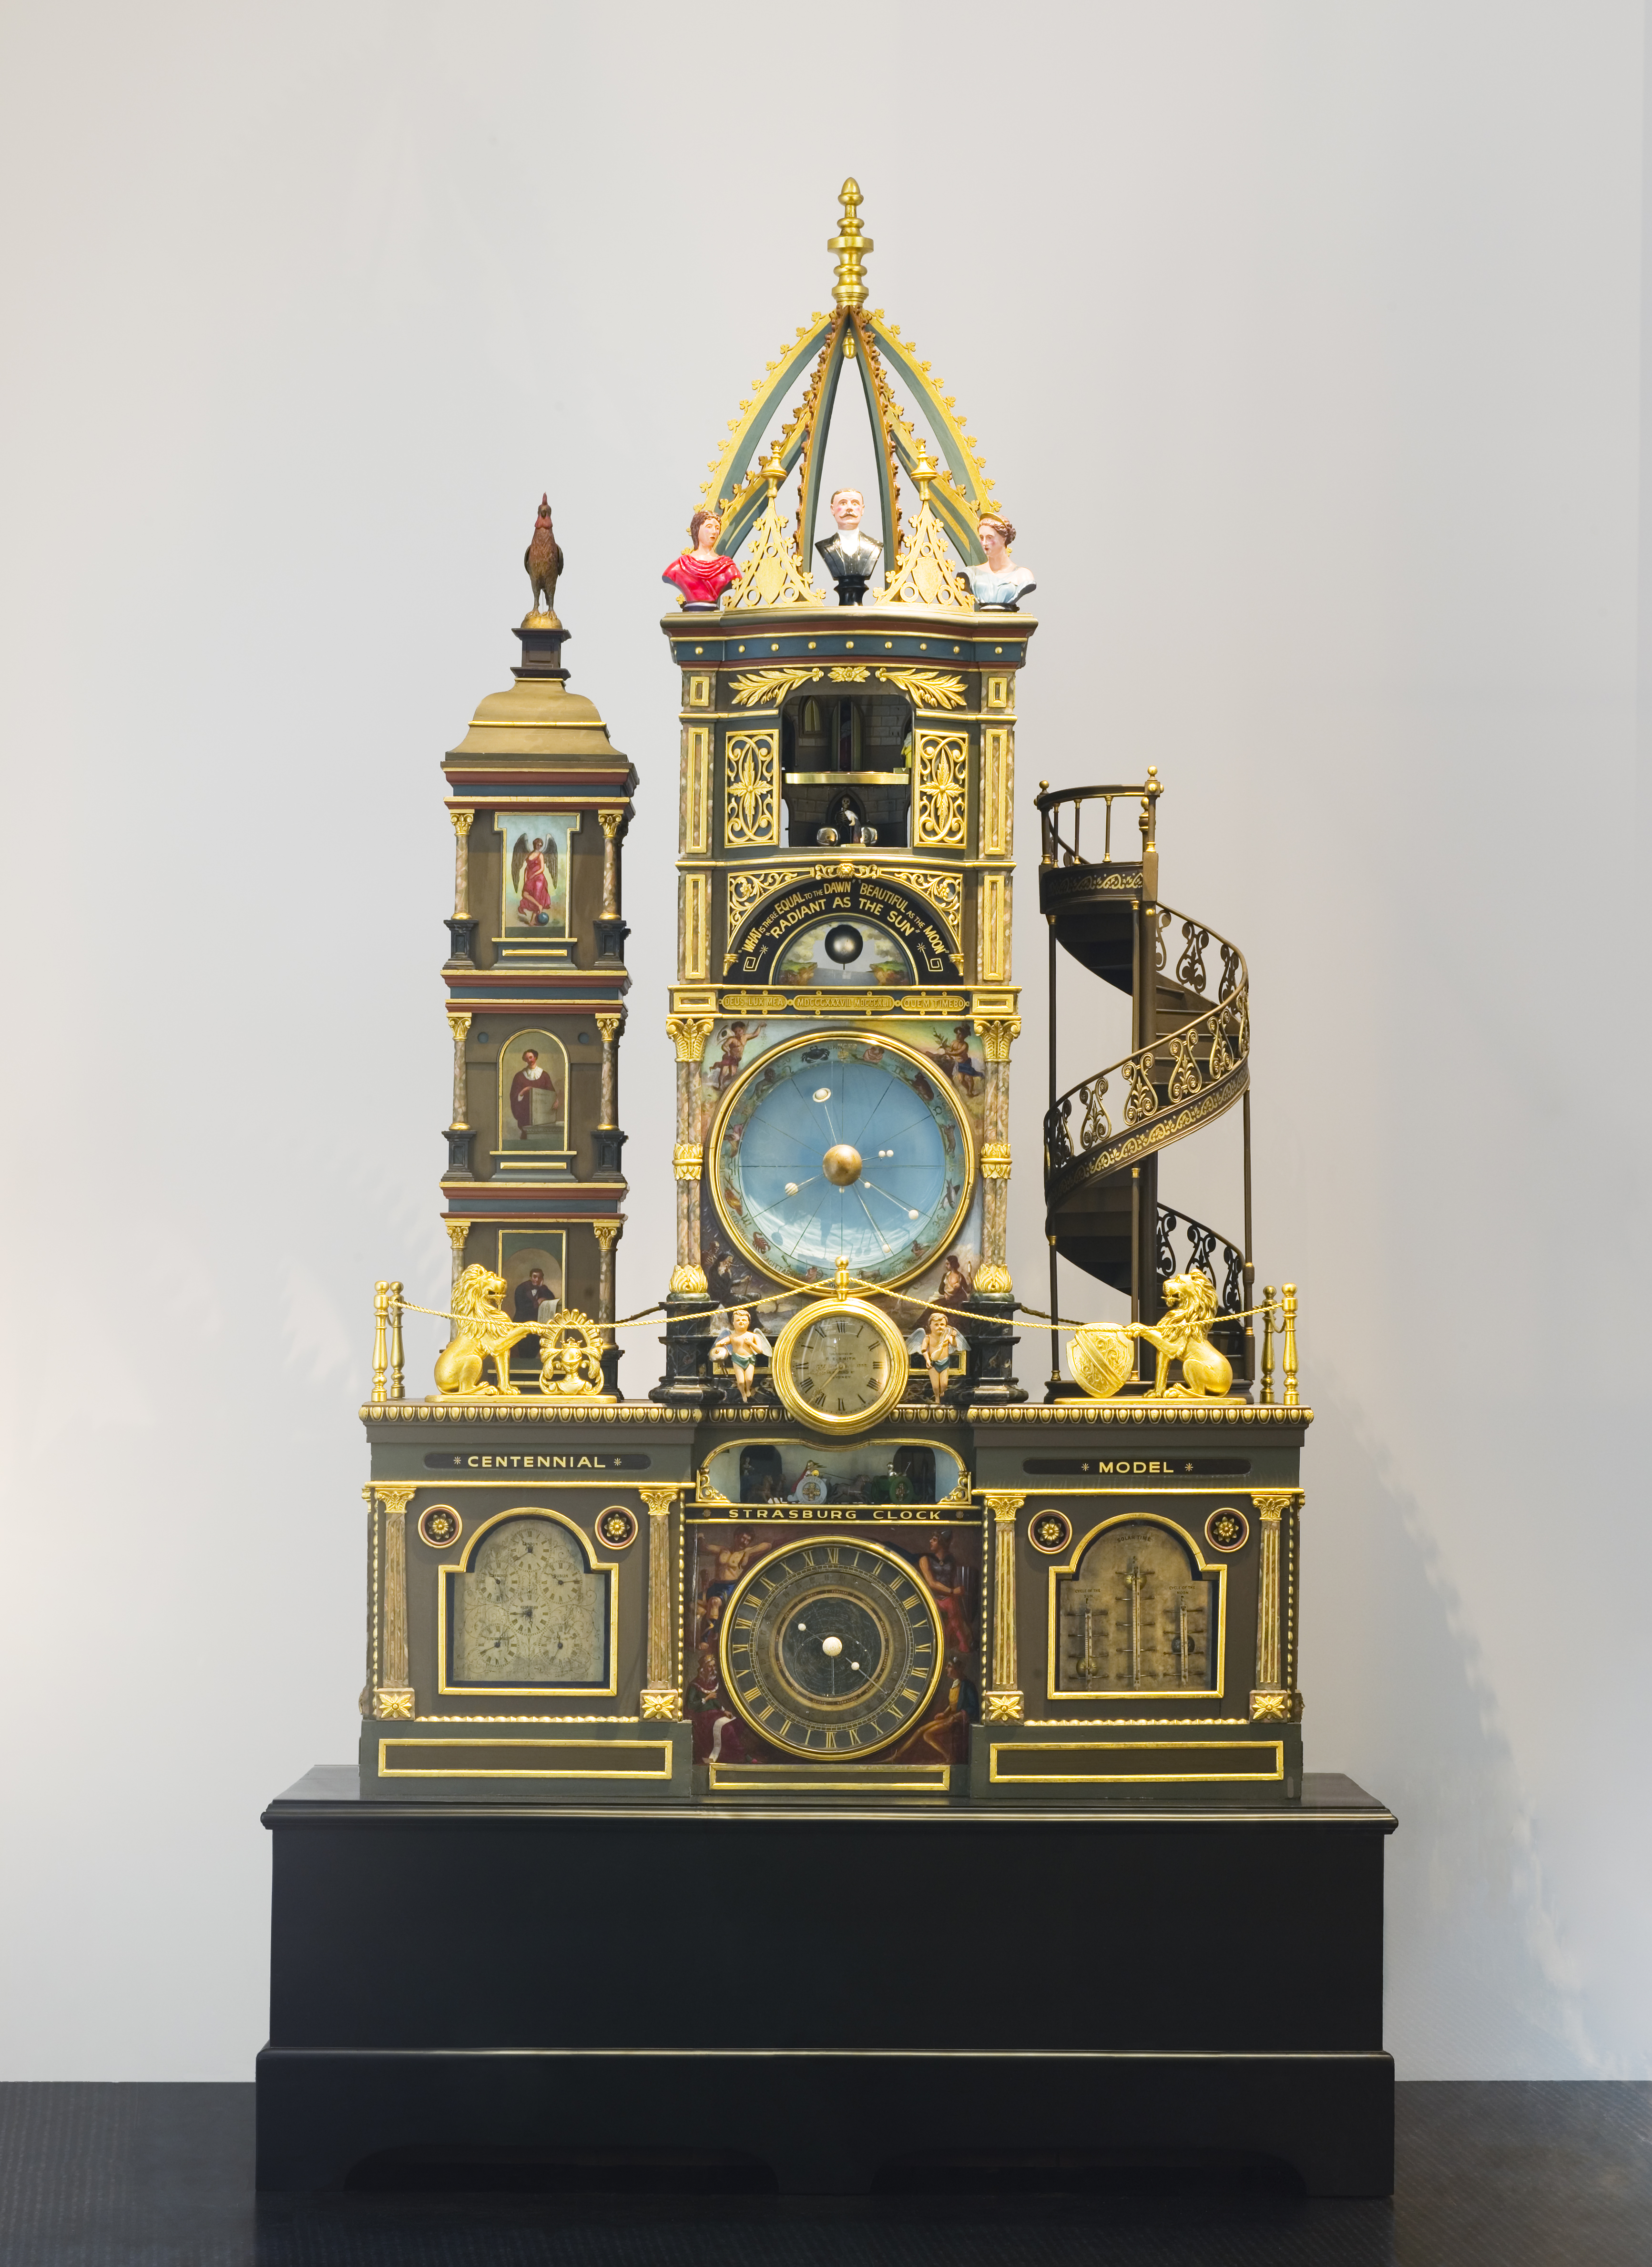 A four-metre high ornate gold clock with a tall centre tower with a procession of the 12 Apostles inside an alcove, a shorter tower on the left and a spiral staircase on the right.